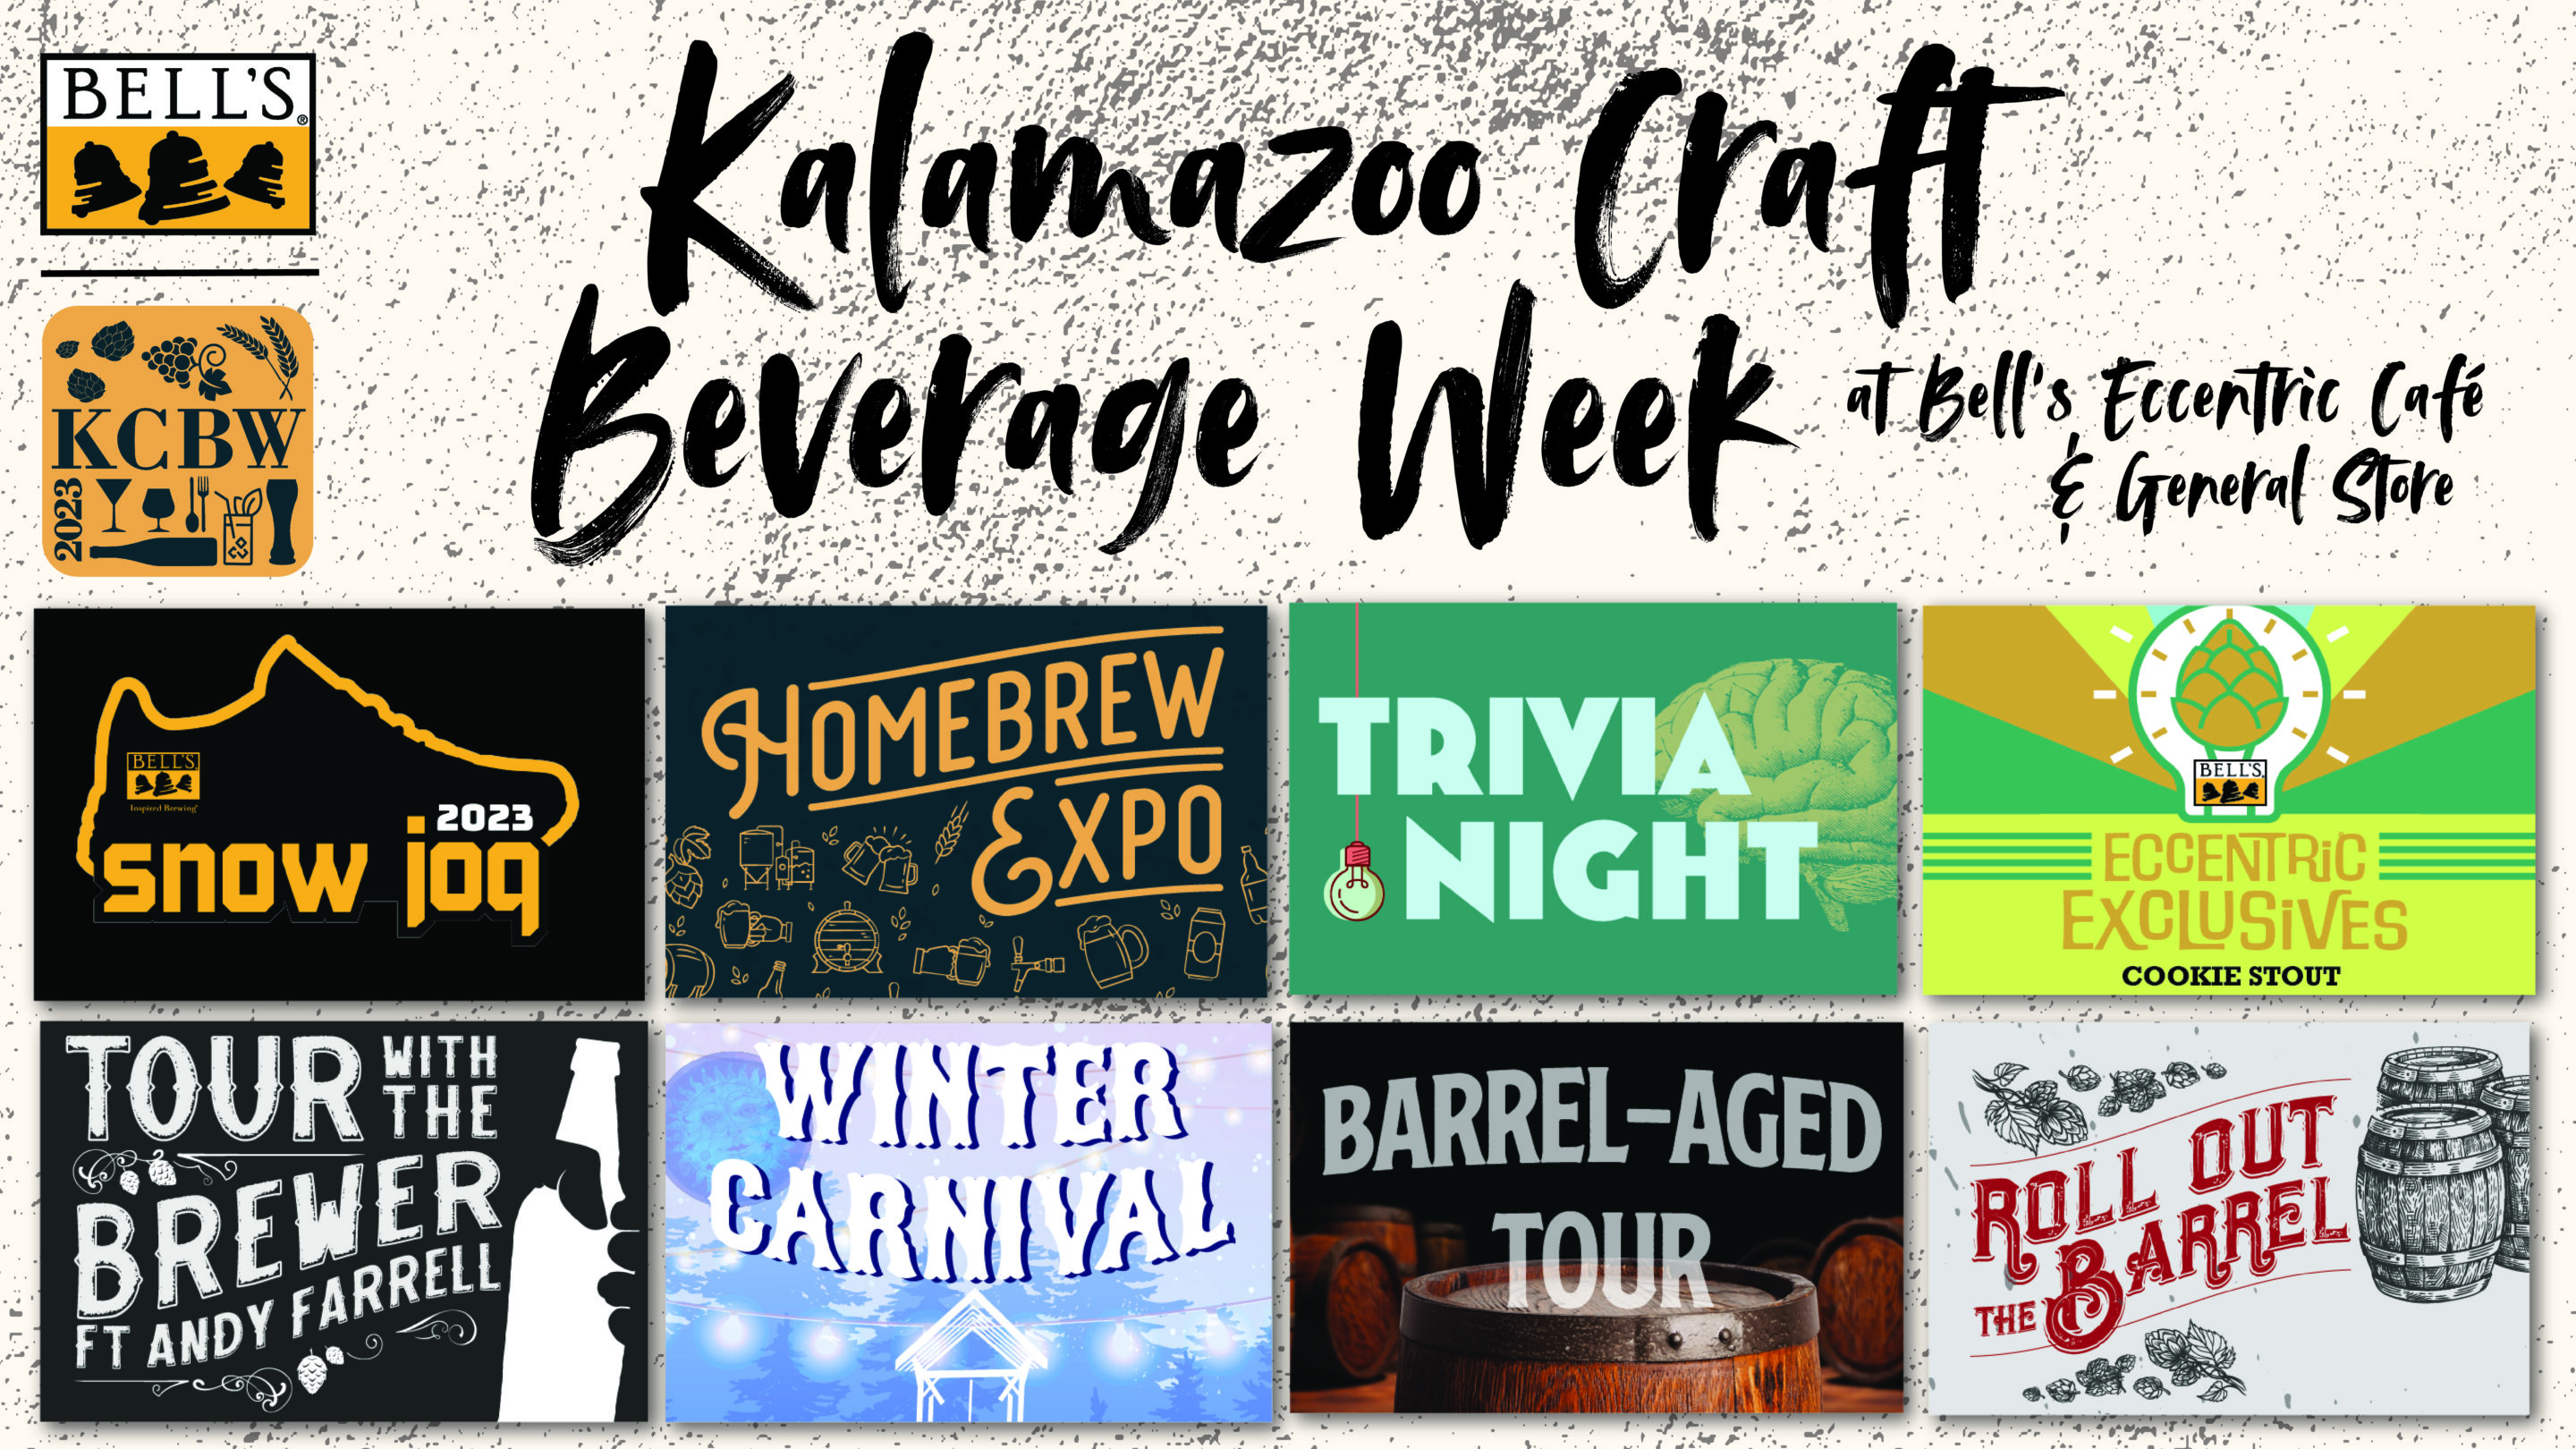 A flyer for the kalamazoo craft beverage week